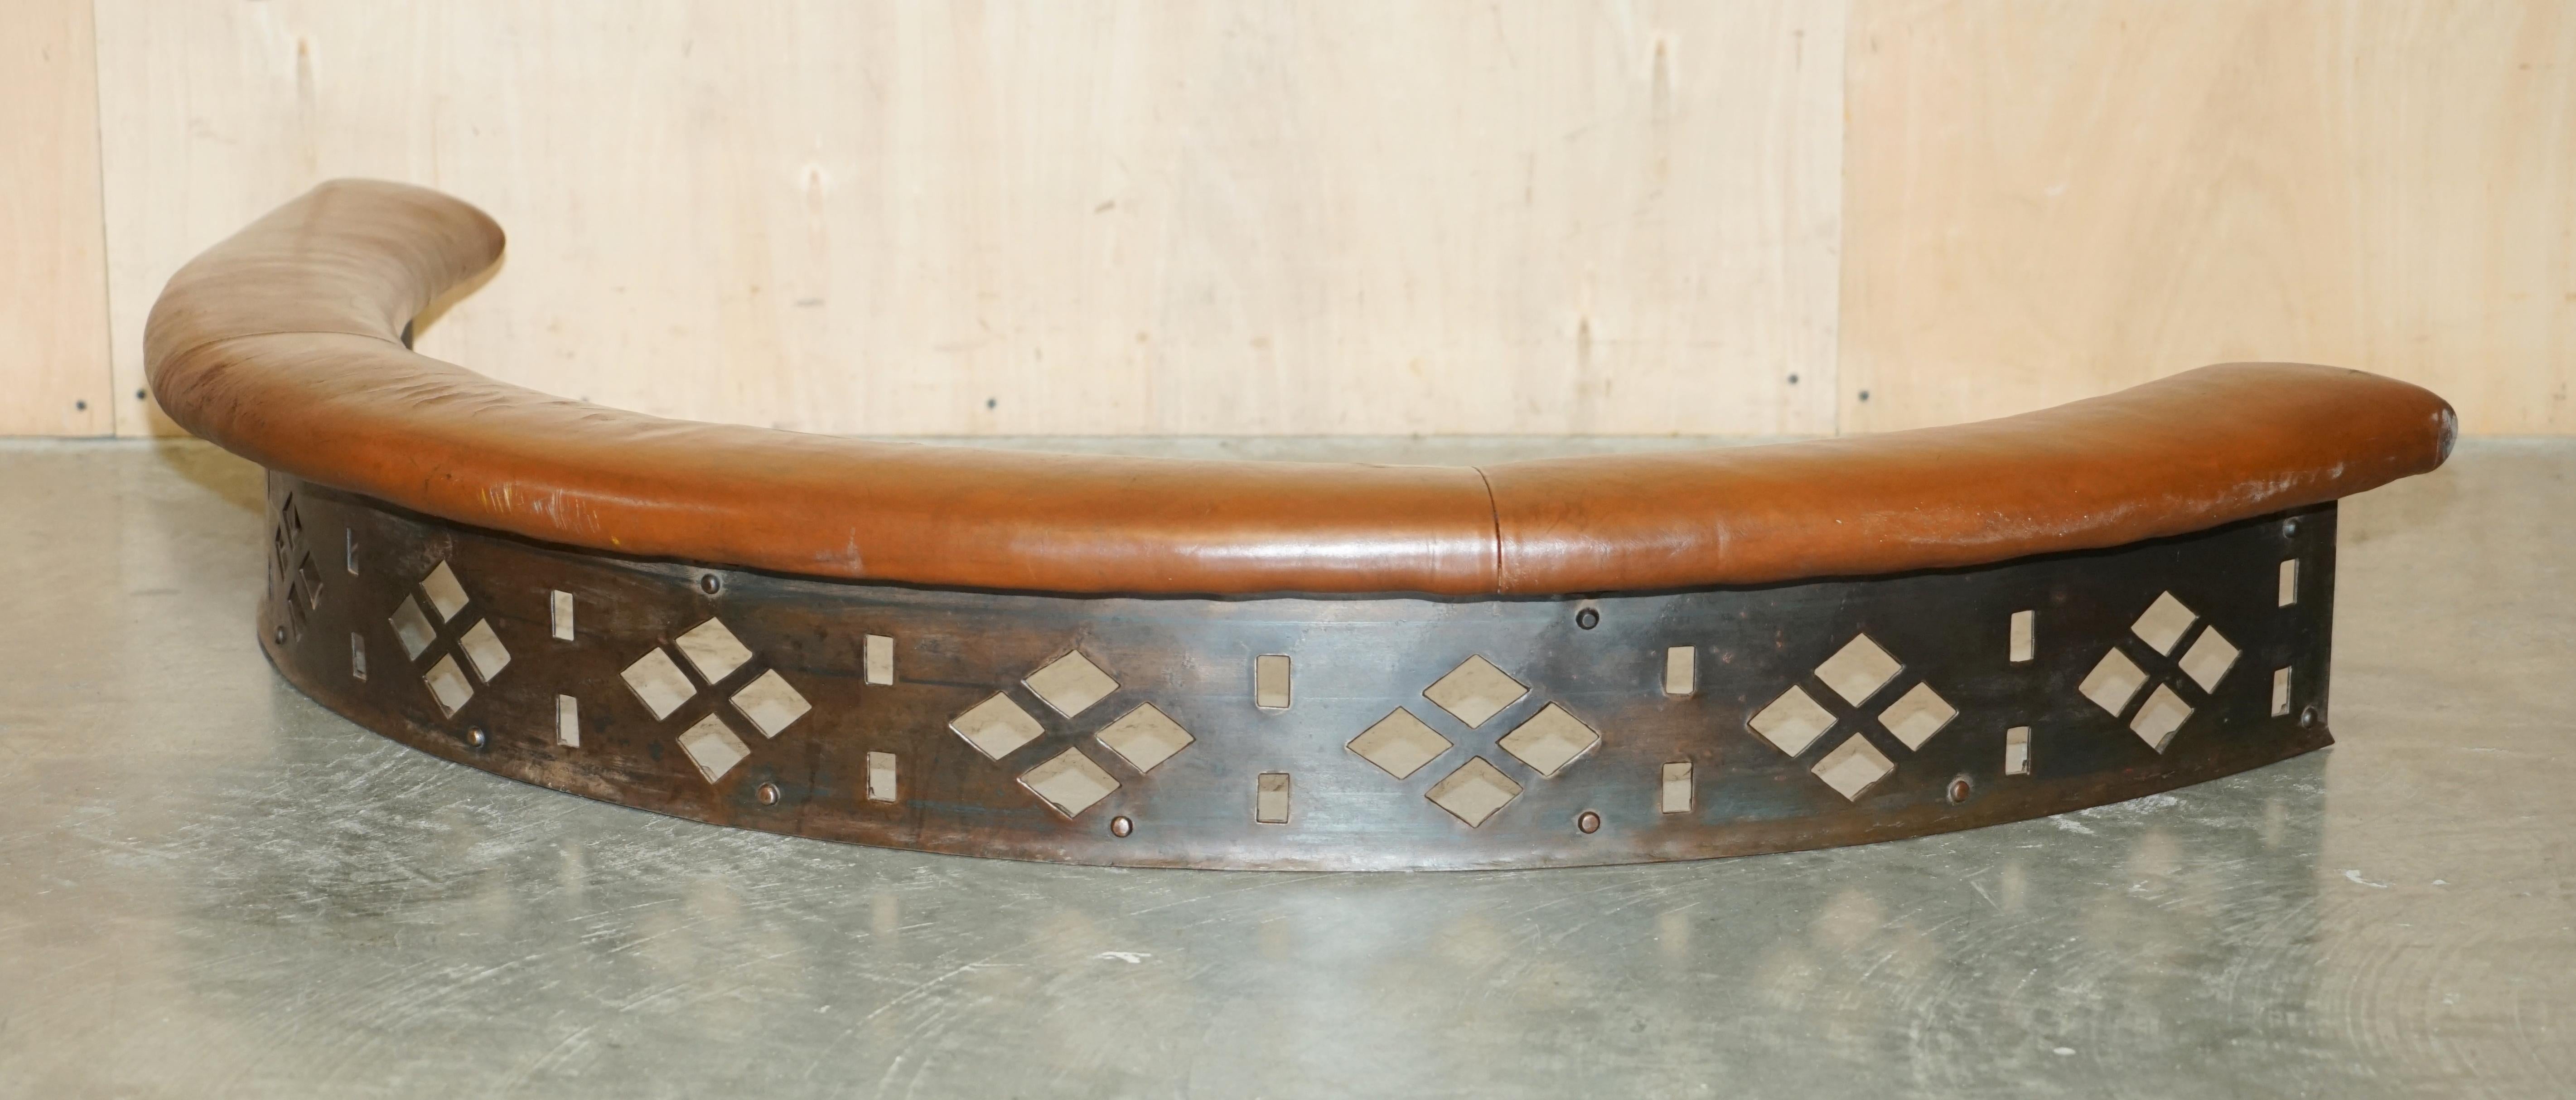 Royal House Antiques

Royal House Antiques is delighted to offer for sale this unique antique circa 1880-1900 pierced metal brown leather Fire place club fender 

Please note the delivery fee listed is just a guide, it covers within the M25 only for